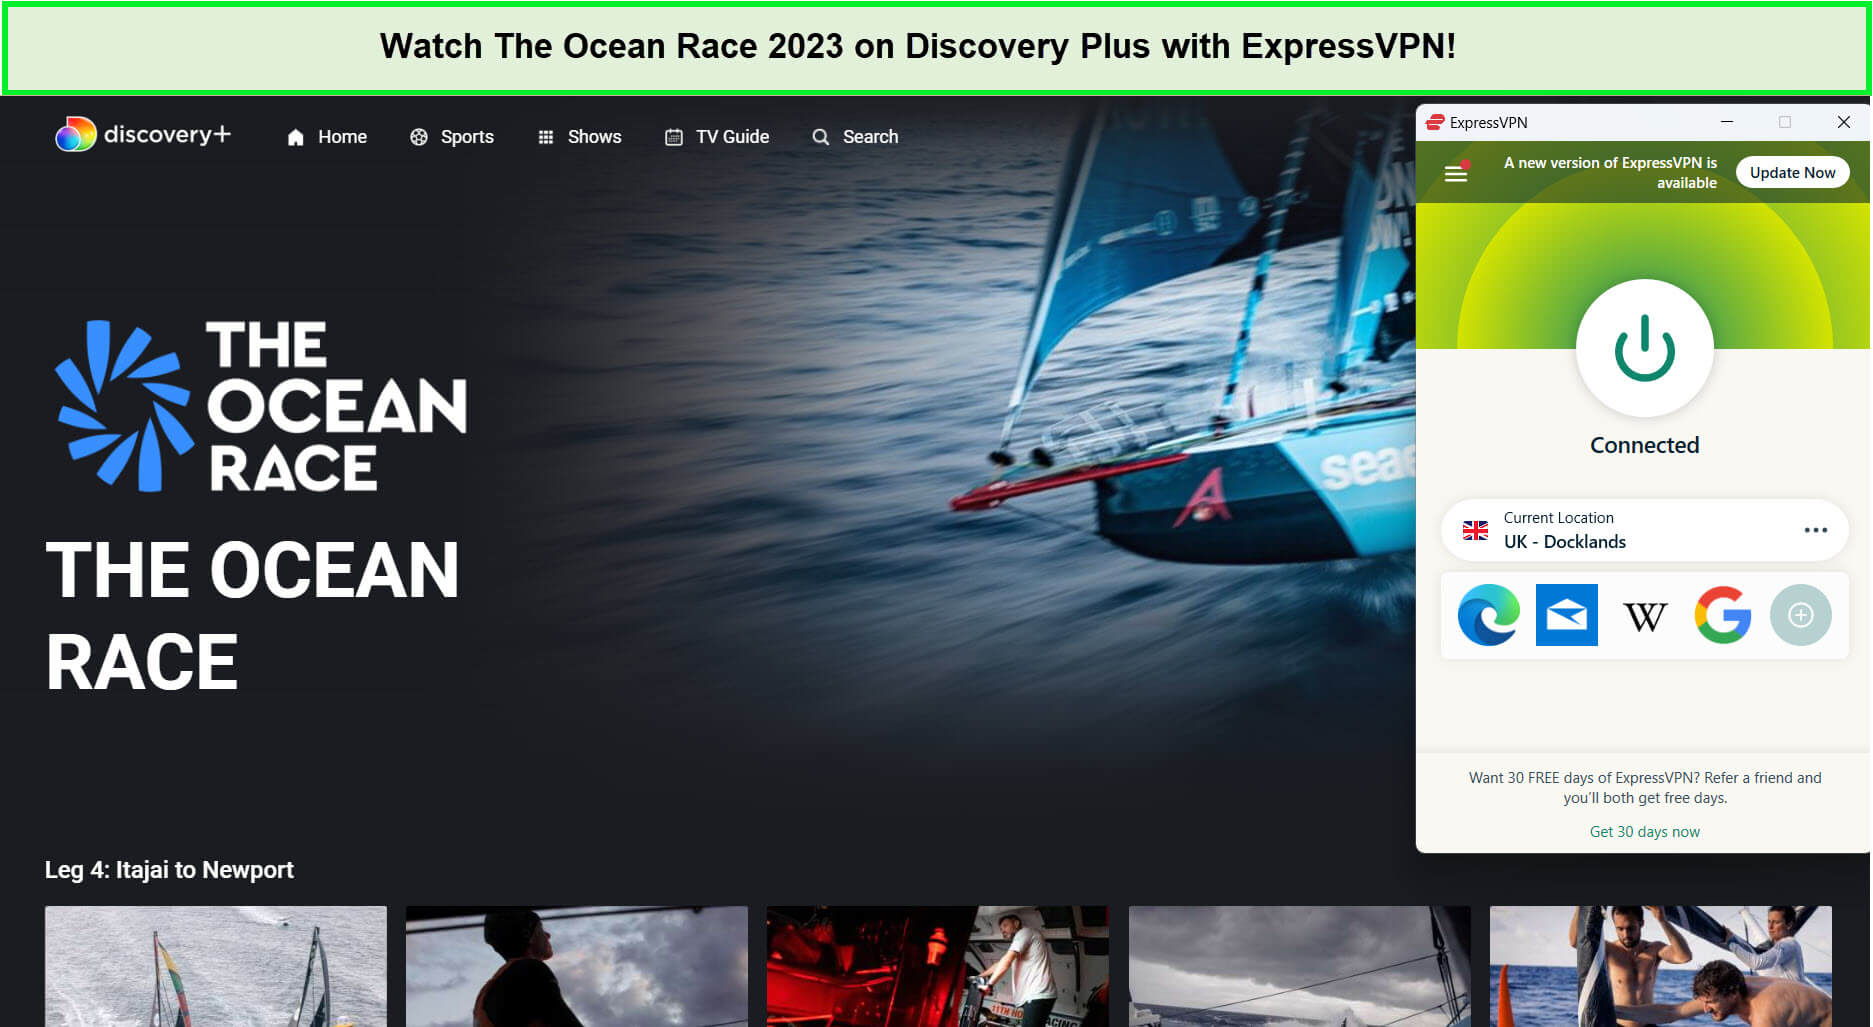 expressvpn-unblocks-the-ocean-race-2023-live-in-India-on-discovery-plus